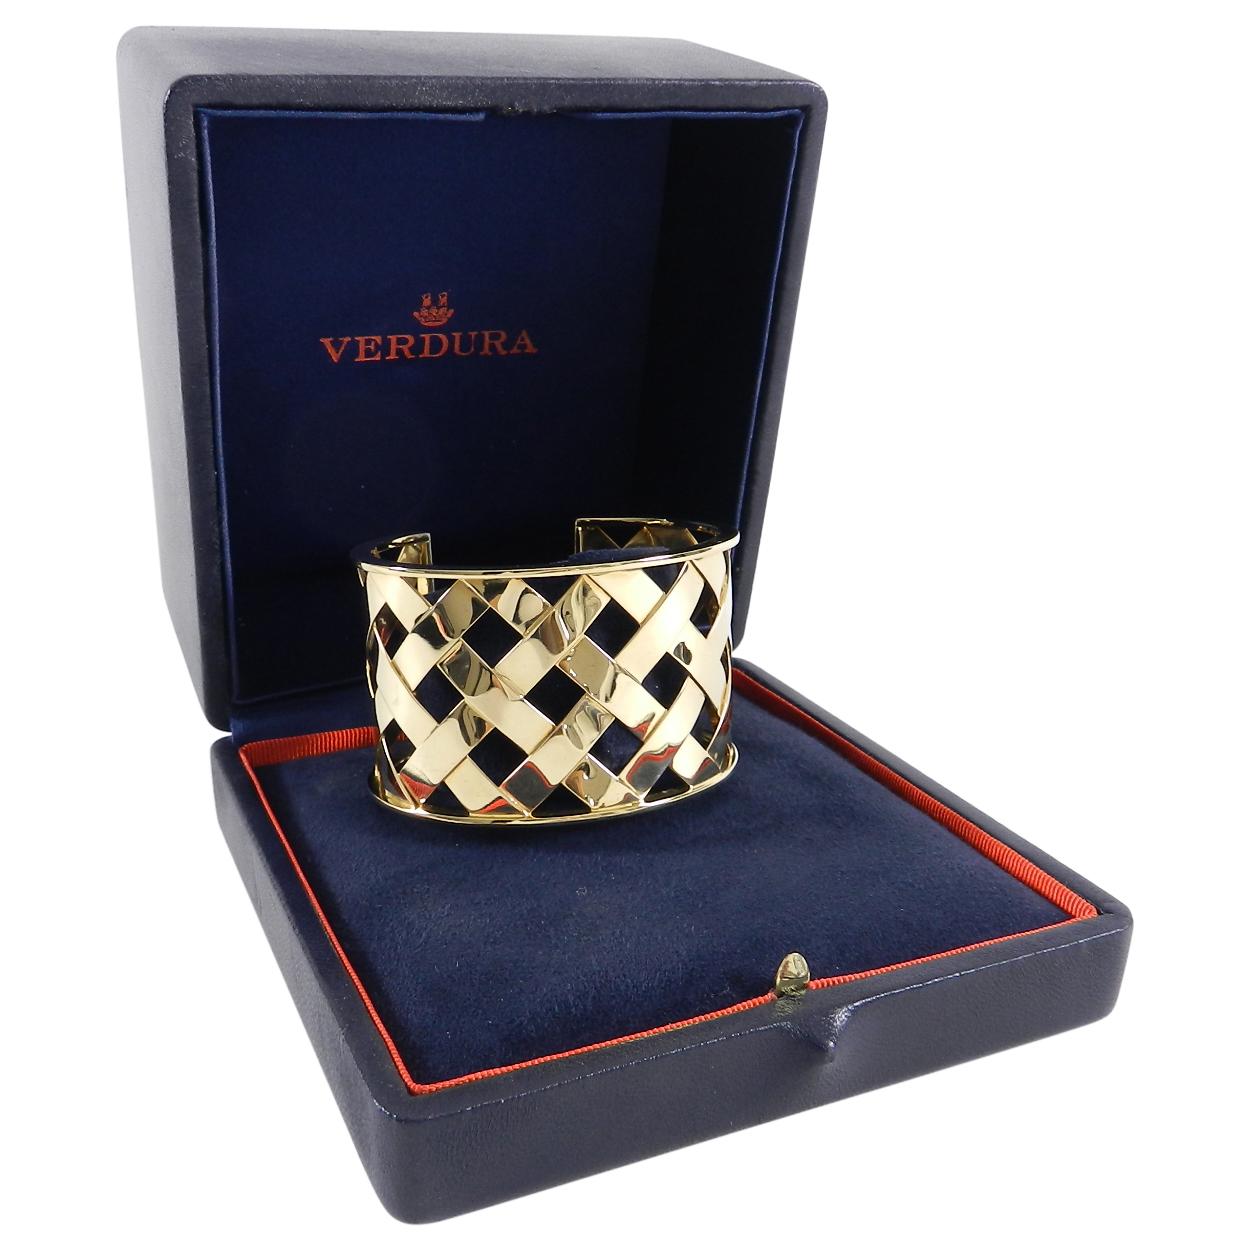 Verdura 18k Yellow Gold Criss Cross Cuff Bracelet.  Classic and iconic Verdura bracelet with basketweave design.  Size small.  Measures 1-⅛” wide, 6.25” interior circumference including a 1-⅛” gap.  Excellent pre-owned condition.  Includes